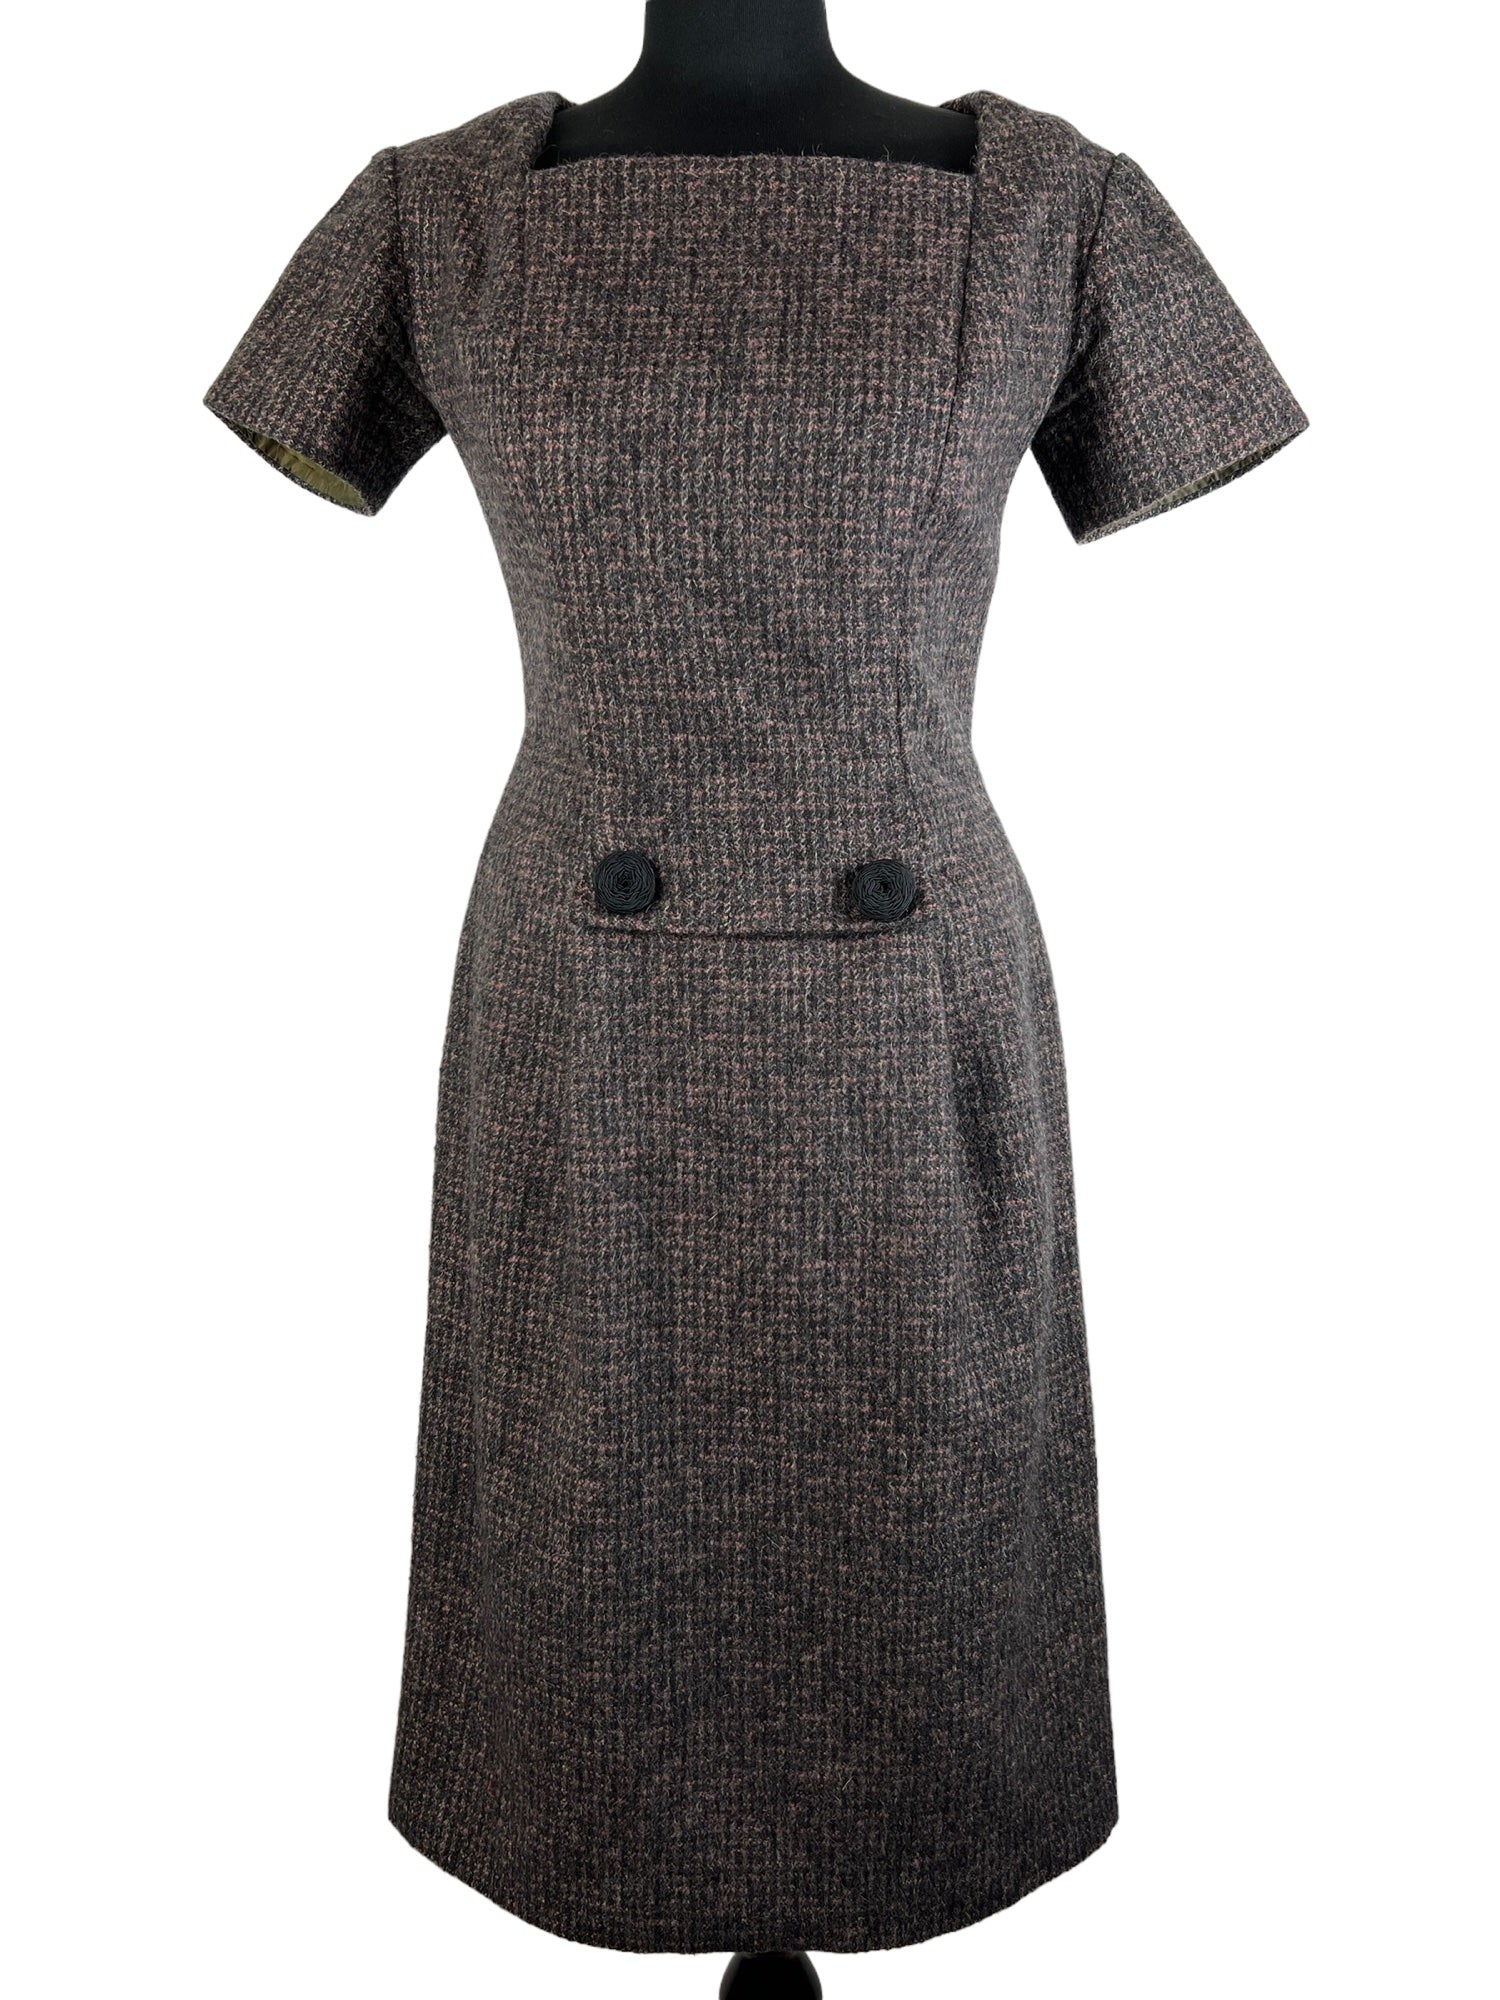 zero waste  wool  womens  vintage  UK  tweed  thrifted  thrift  Sutin Couture  sustainable  style  store  square neckline  slow fashion  shop  second hand  save the planet  reuse  retro  recycled  recycle  recycable  preloved  pink  patterned dress  patterned  online  ladies  grey  fitted  fashion  ethical  Eco friendly  Eco  dress  corsage detail  concious fashion  clothing  clothes  brown  Birmingham  back zip  autumnal  autumn dress  autumn  8  60s  1960s